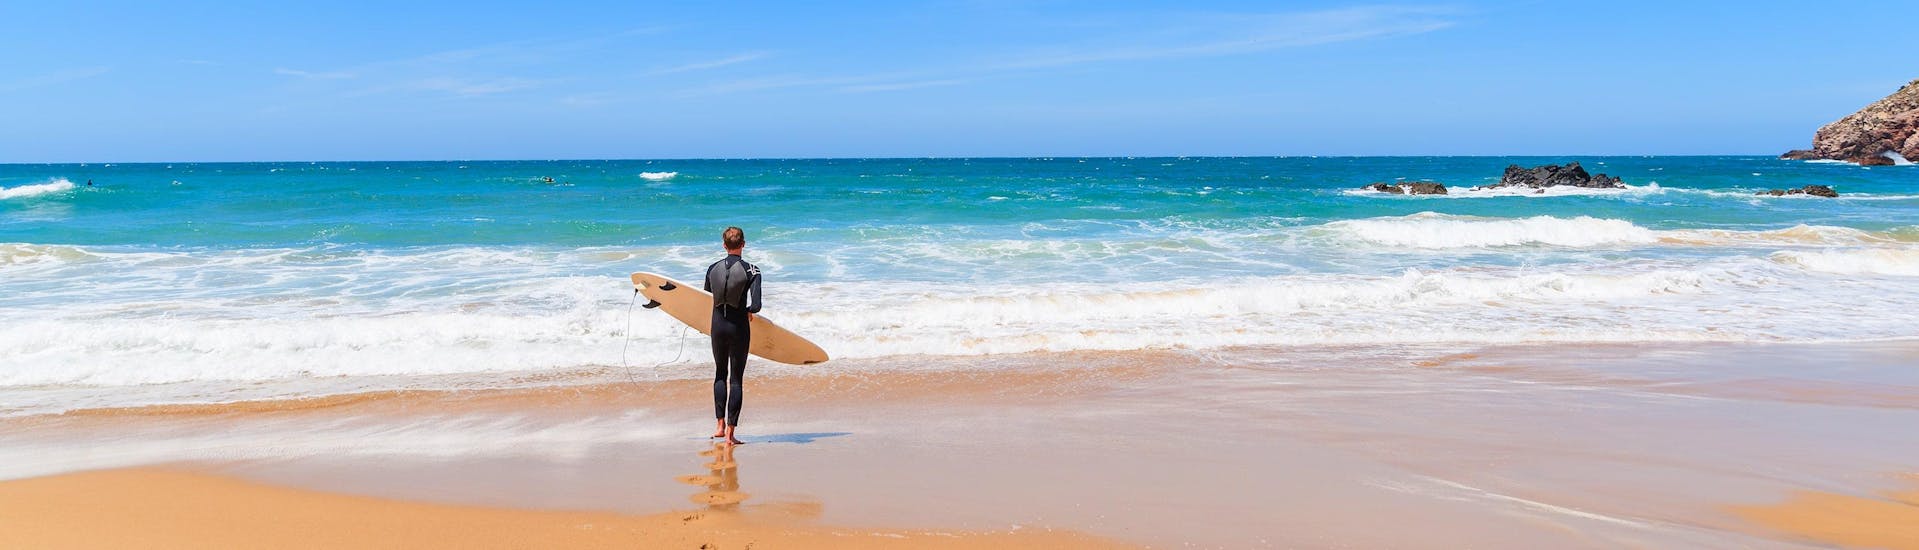 A young man dressed in a wetsuit is standing on a beach with his surfboard, looking out over the ocean as he gets ready to go surfing in the Algarve.